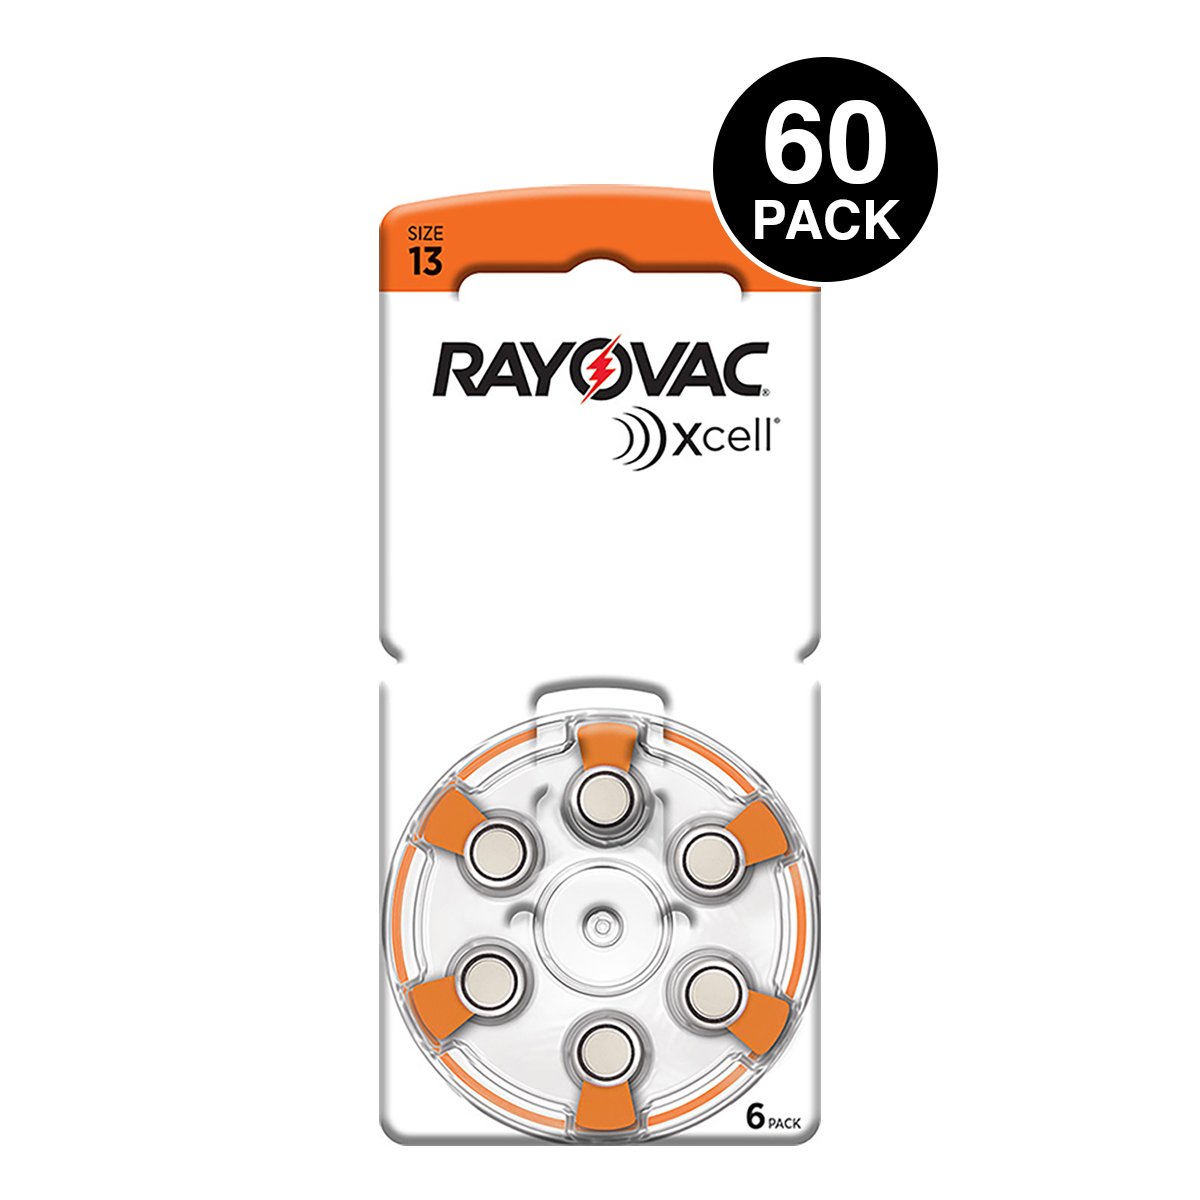 Xcell (Made By Rayovac) Size 13 Hearing Aid Batteries (60 pcs)